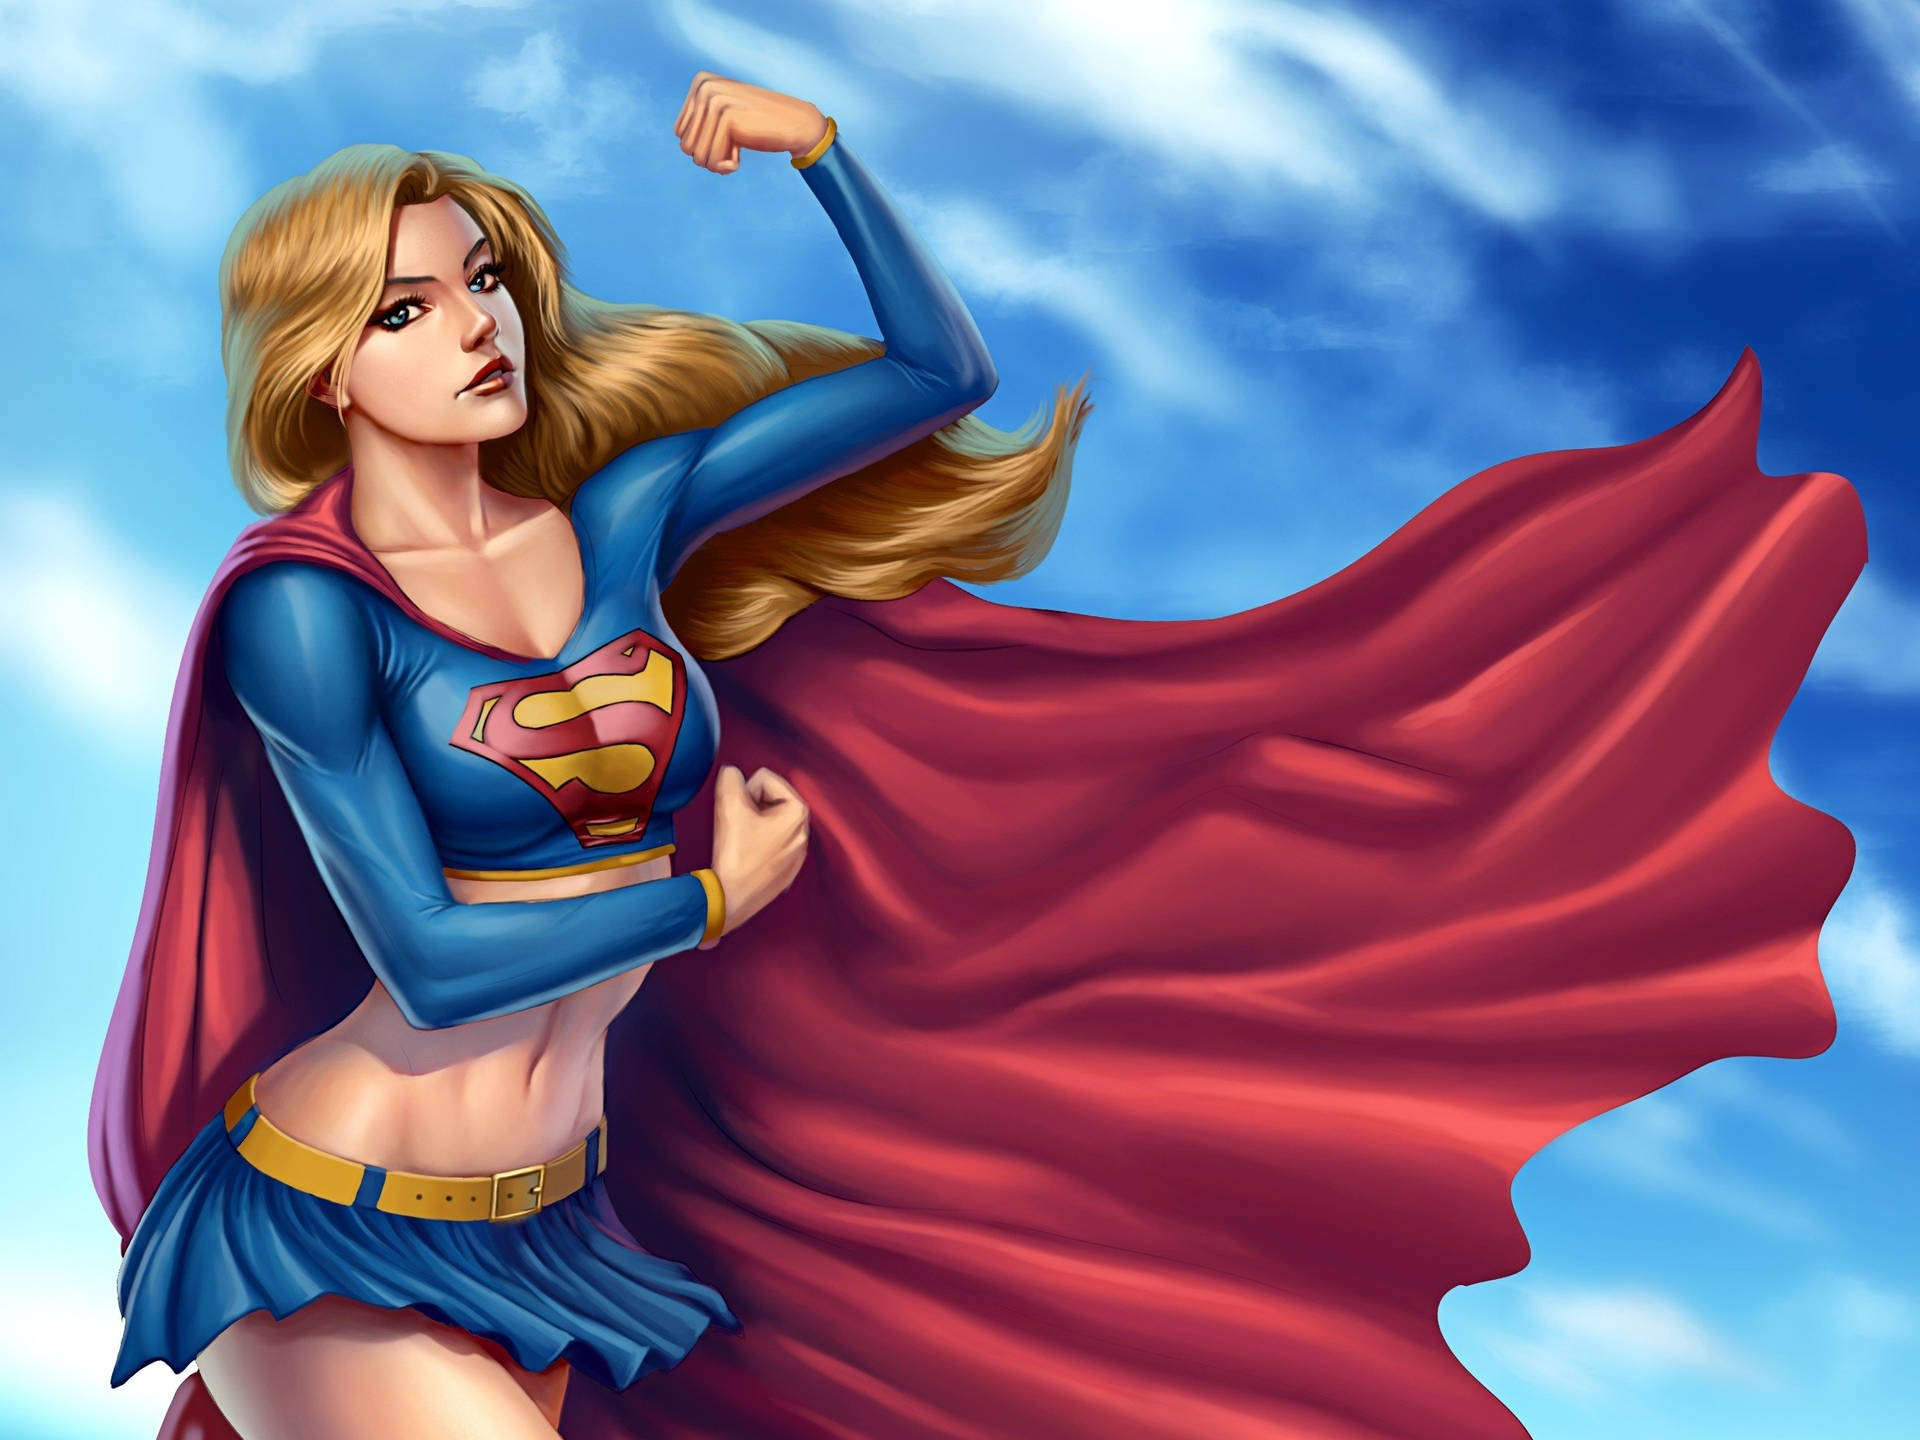 Anime Supergirl In Sky Background